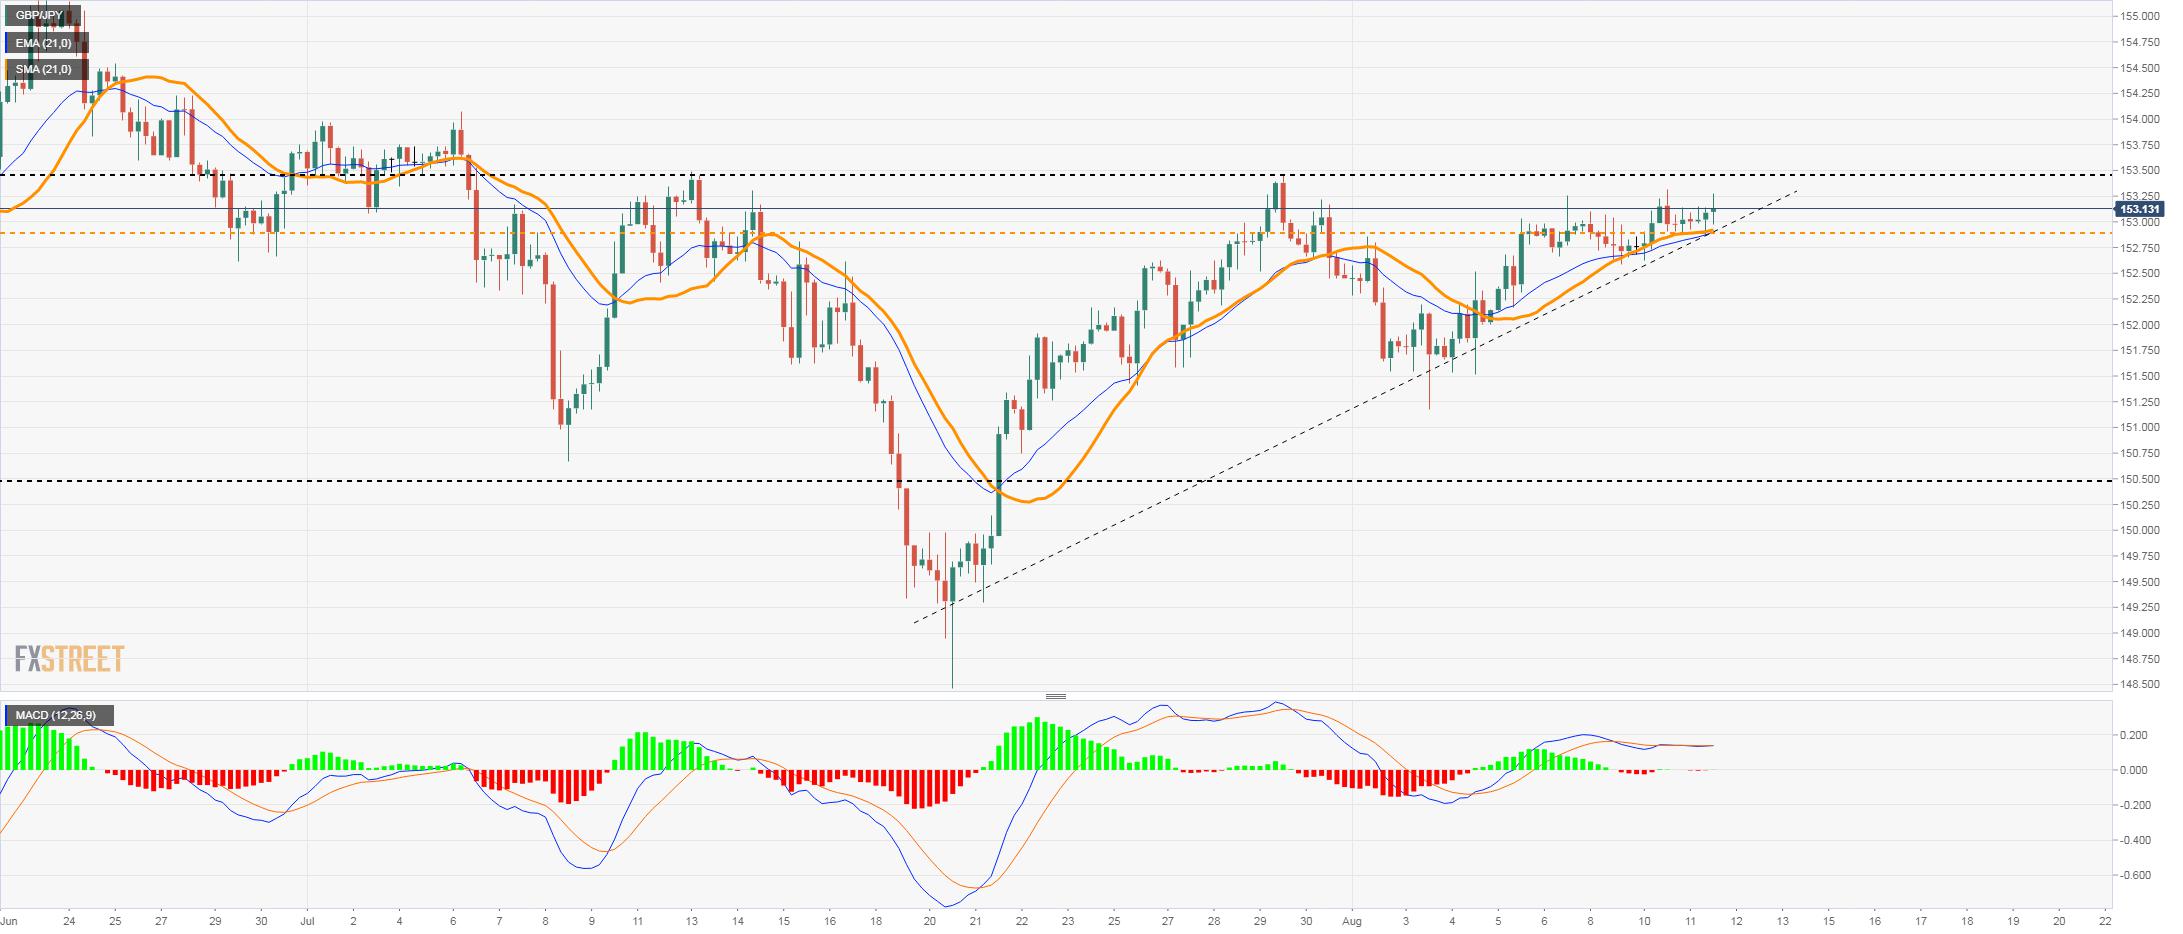 GBP/JPY Price Analysis: Bullish in the short-term while above 152.80